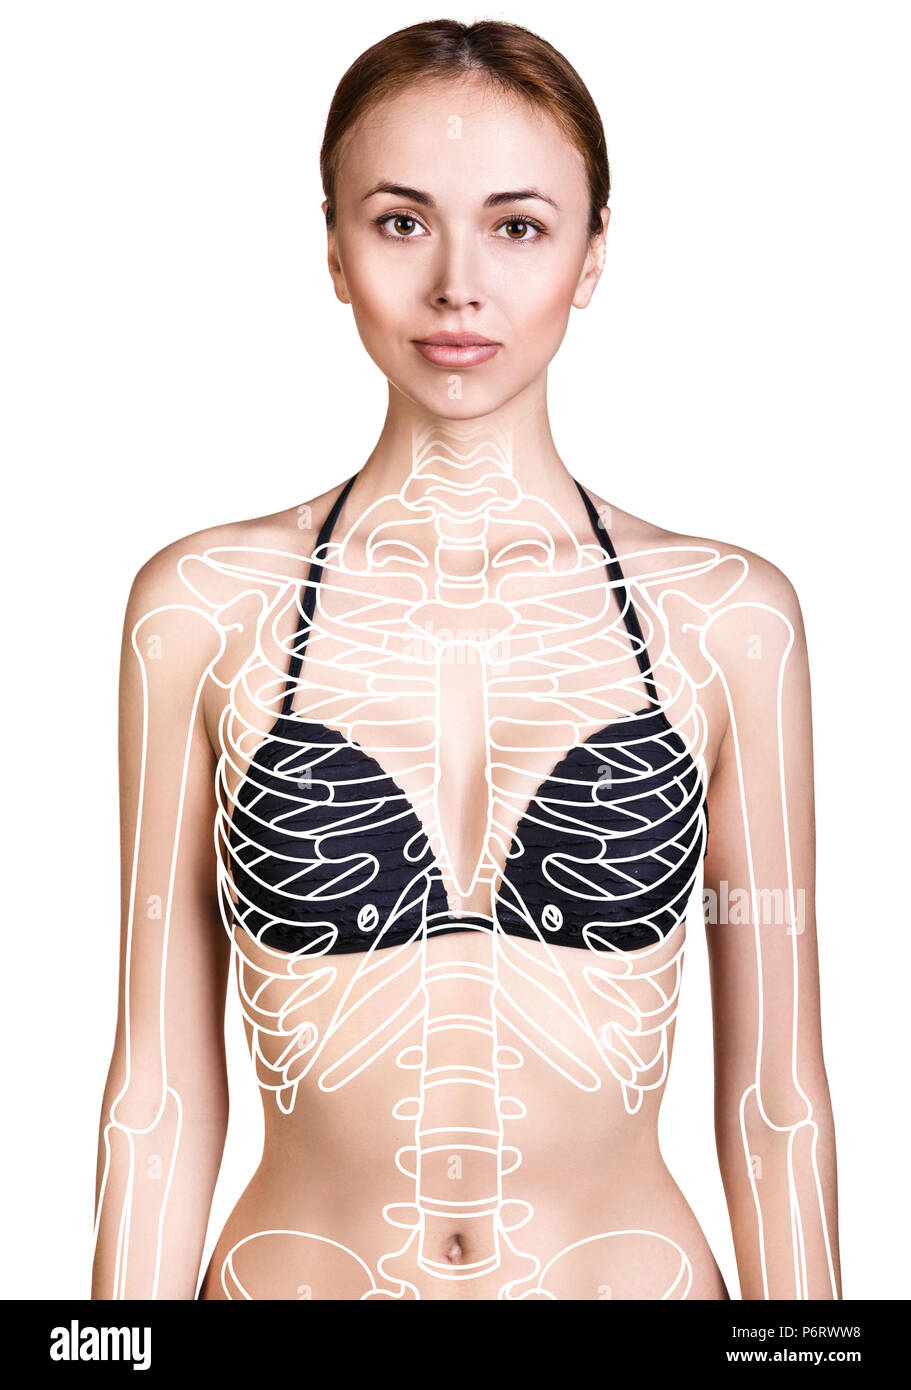 Young woman with paint skeleton on her body. Stock Photo